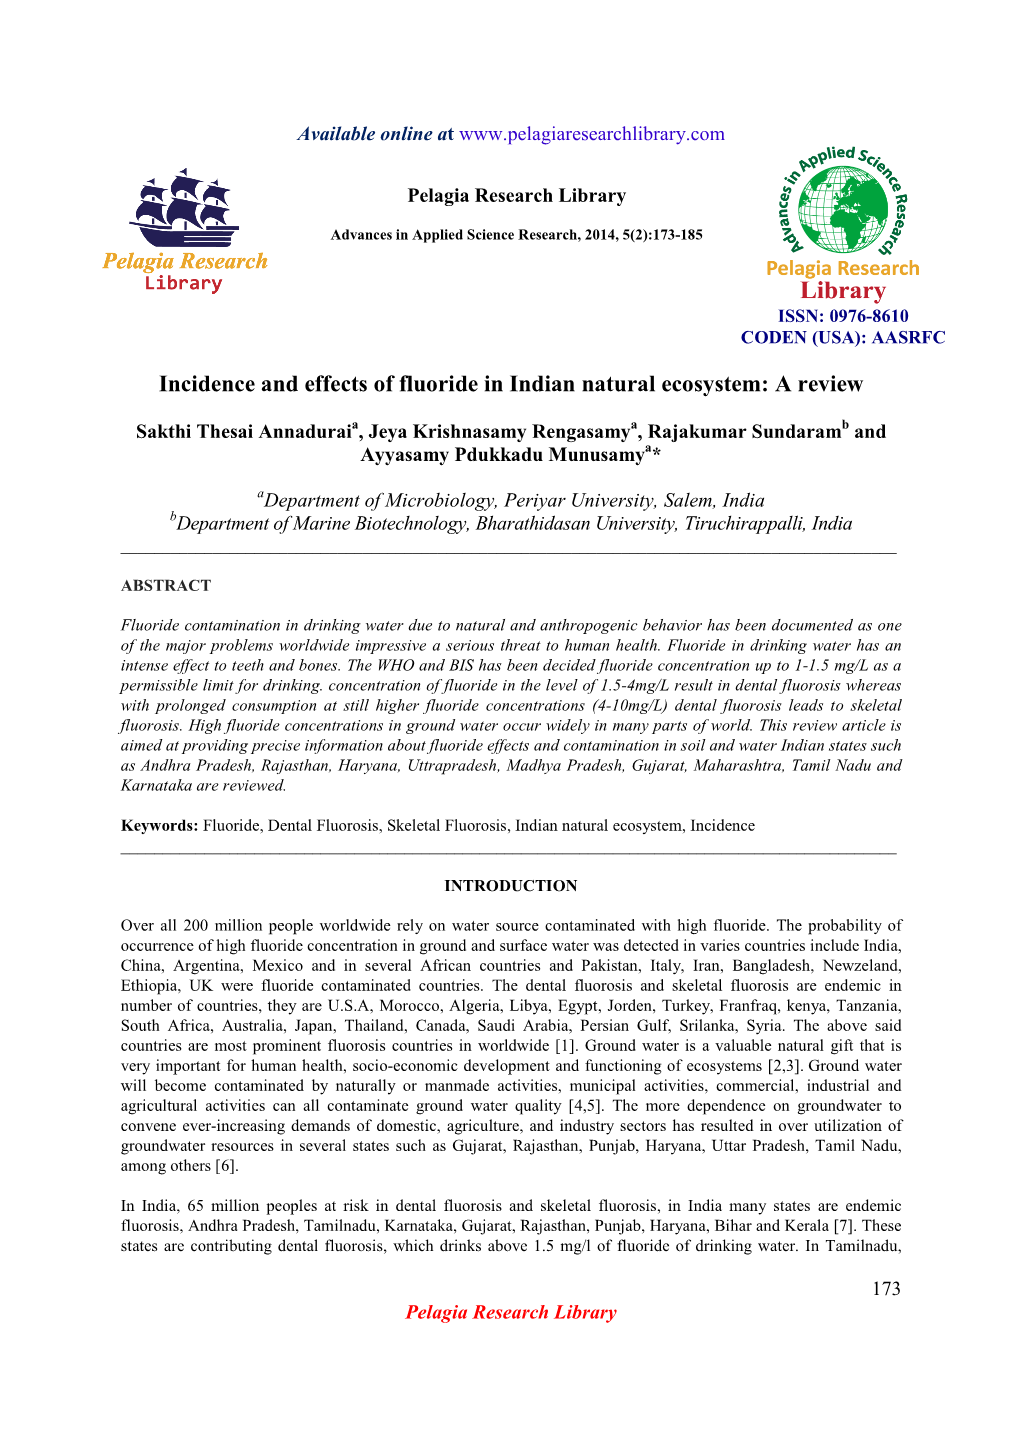 Incidence and Effects of Fluoride in Indian Natural Ecosystem: a Review